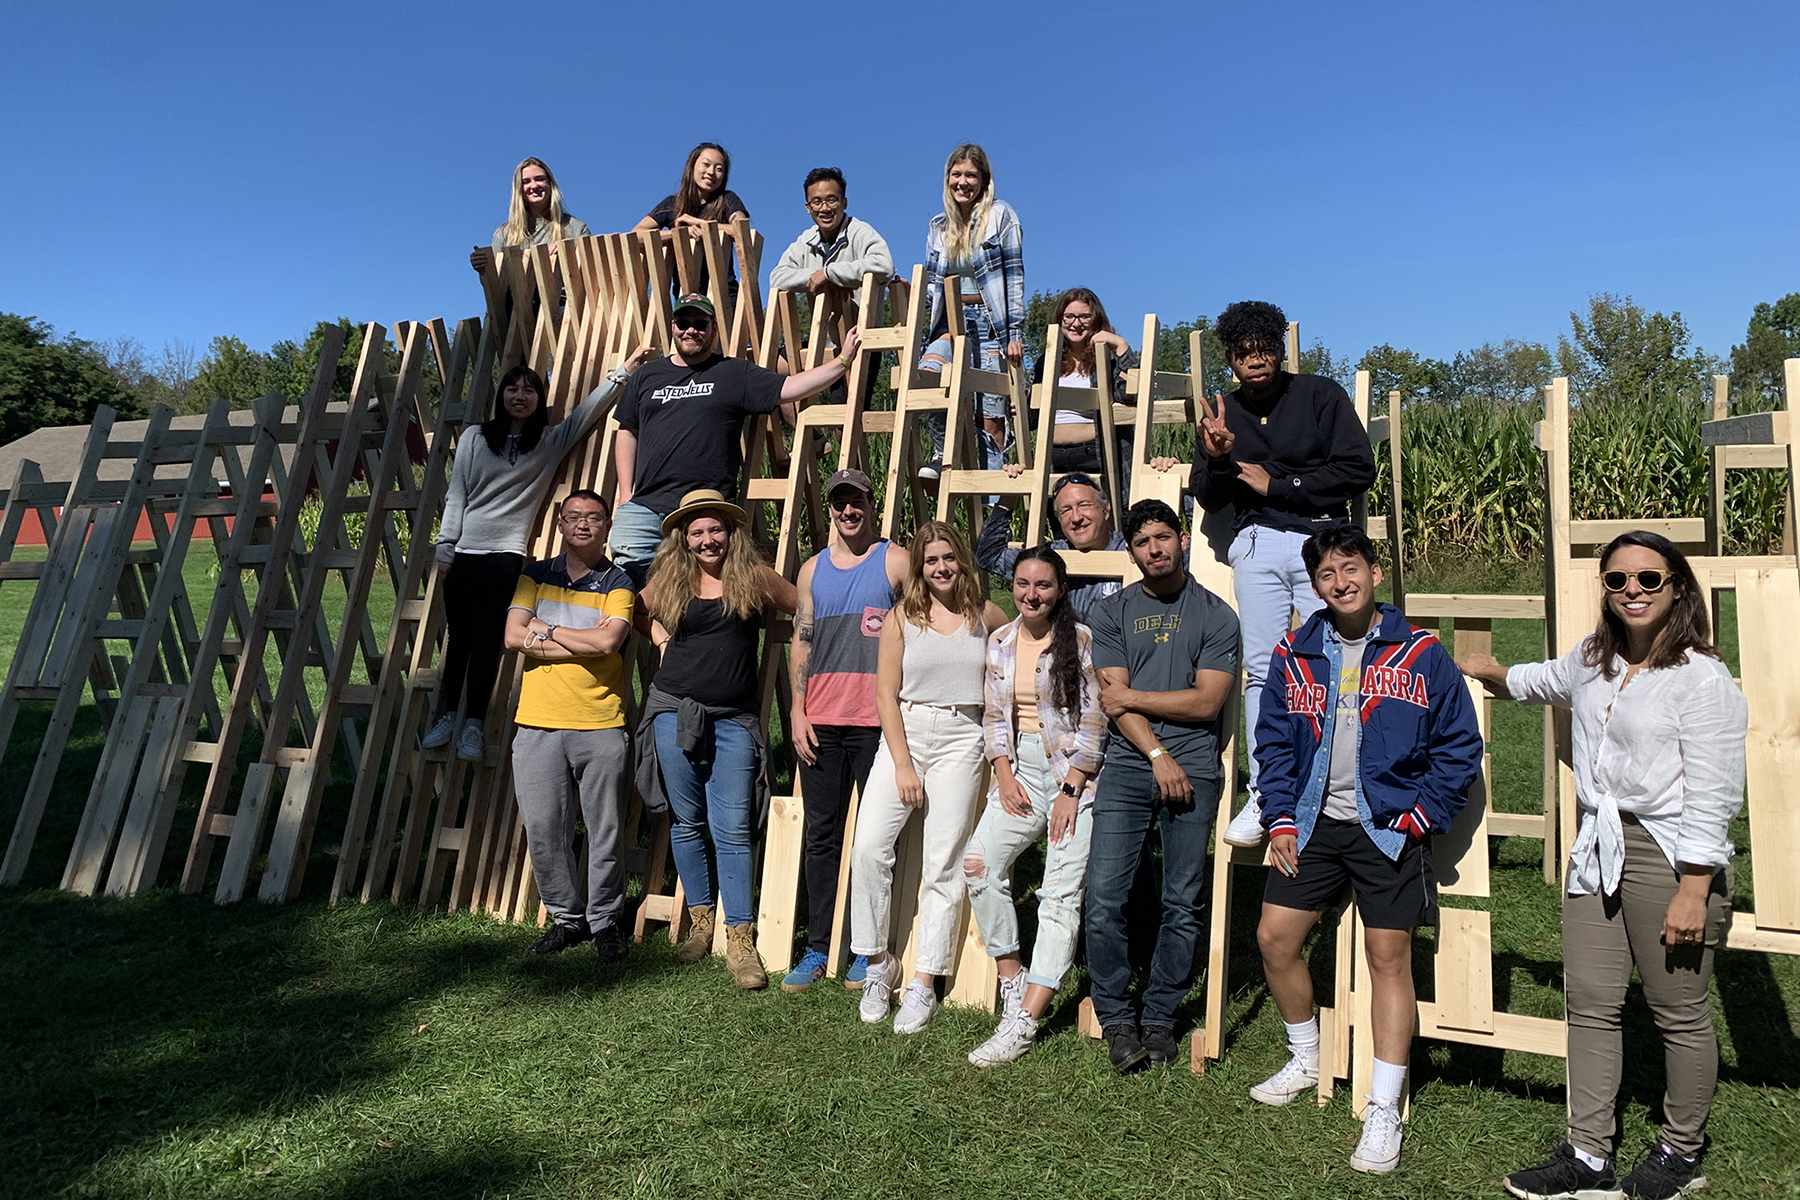 A group of RIT designers and architects post for a photo on the temporary wood installation they created on the grounds of the 1969 Woodstock festival.